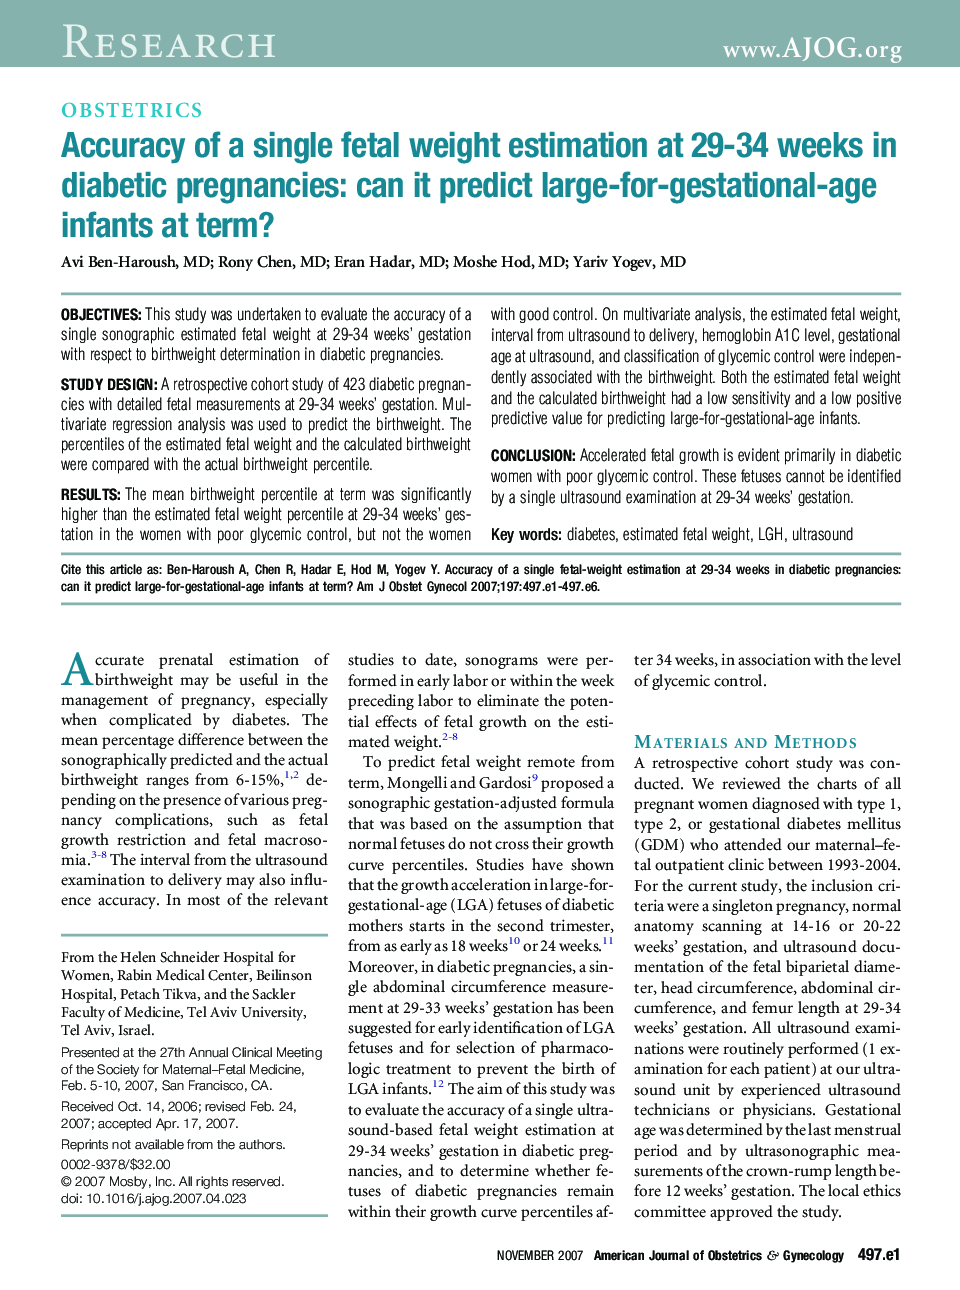 Accuracy of a single fetal weight estimation at 29-34 weeks in diabetic pregnancies: can it predict large-for-gestational-age infants at term?